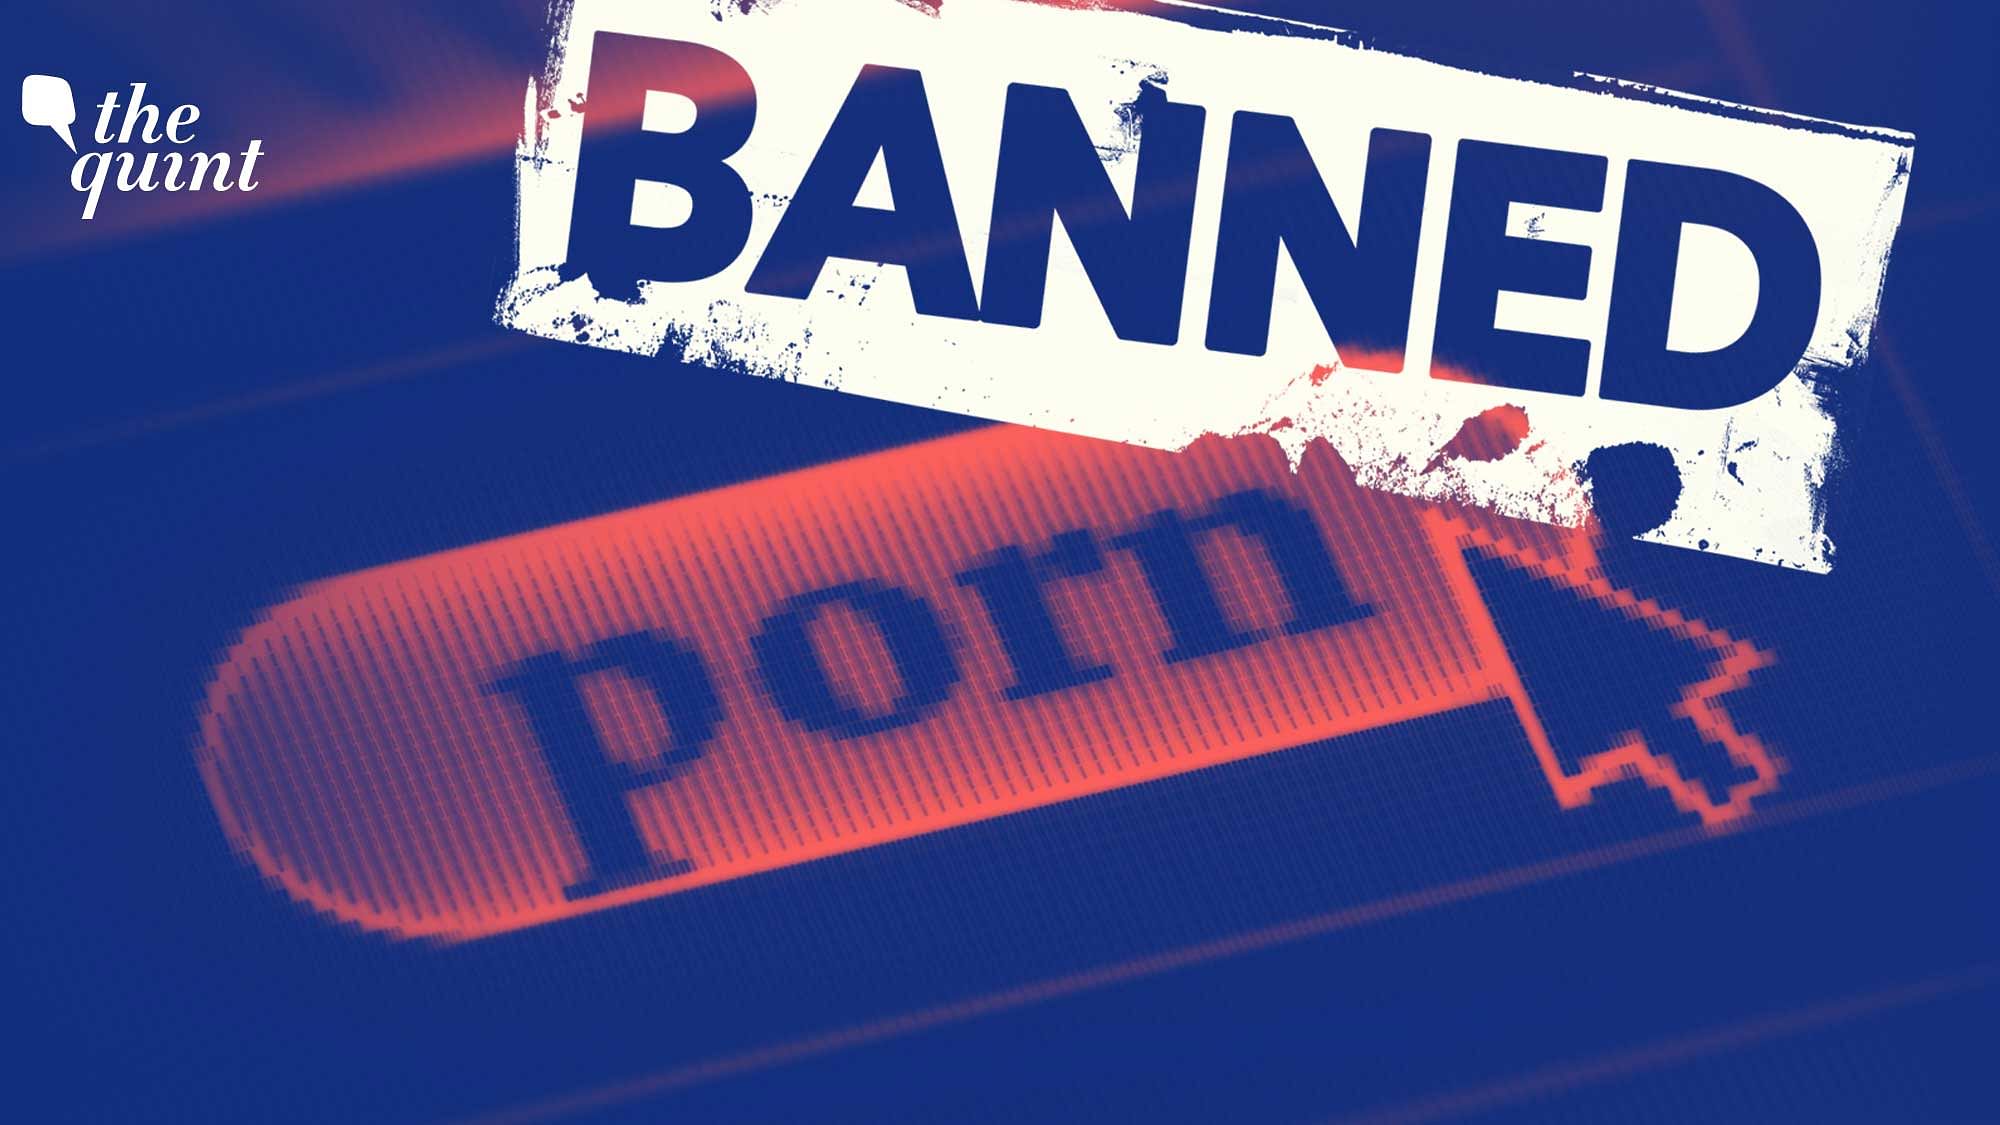 FAQ India Porn Ban Government Blocks 67 More Websites, Here’s the